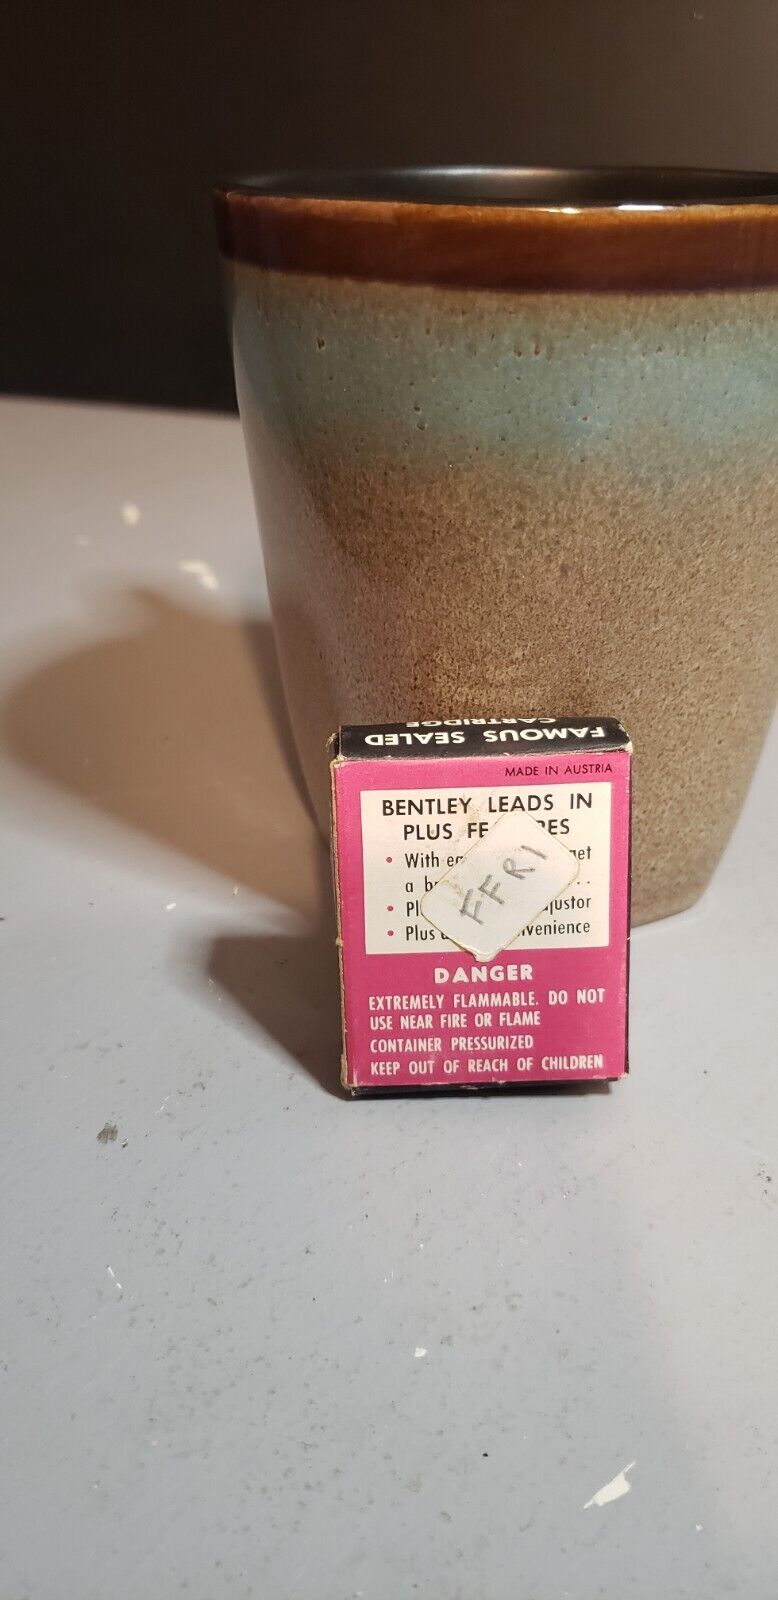 BENTLY BUTANE REFILL FUEL CELL NOS FITS FLICK OR PIPE LITE